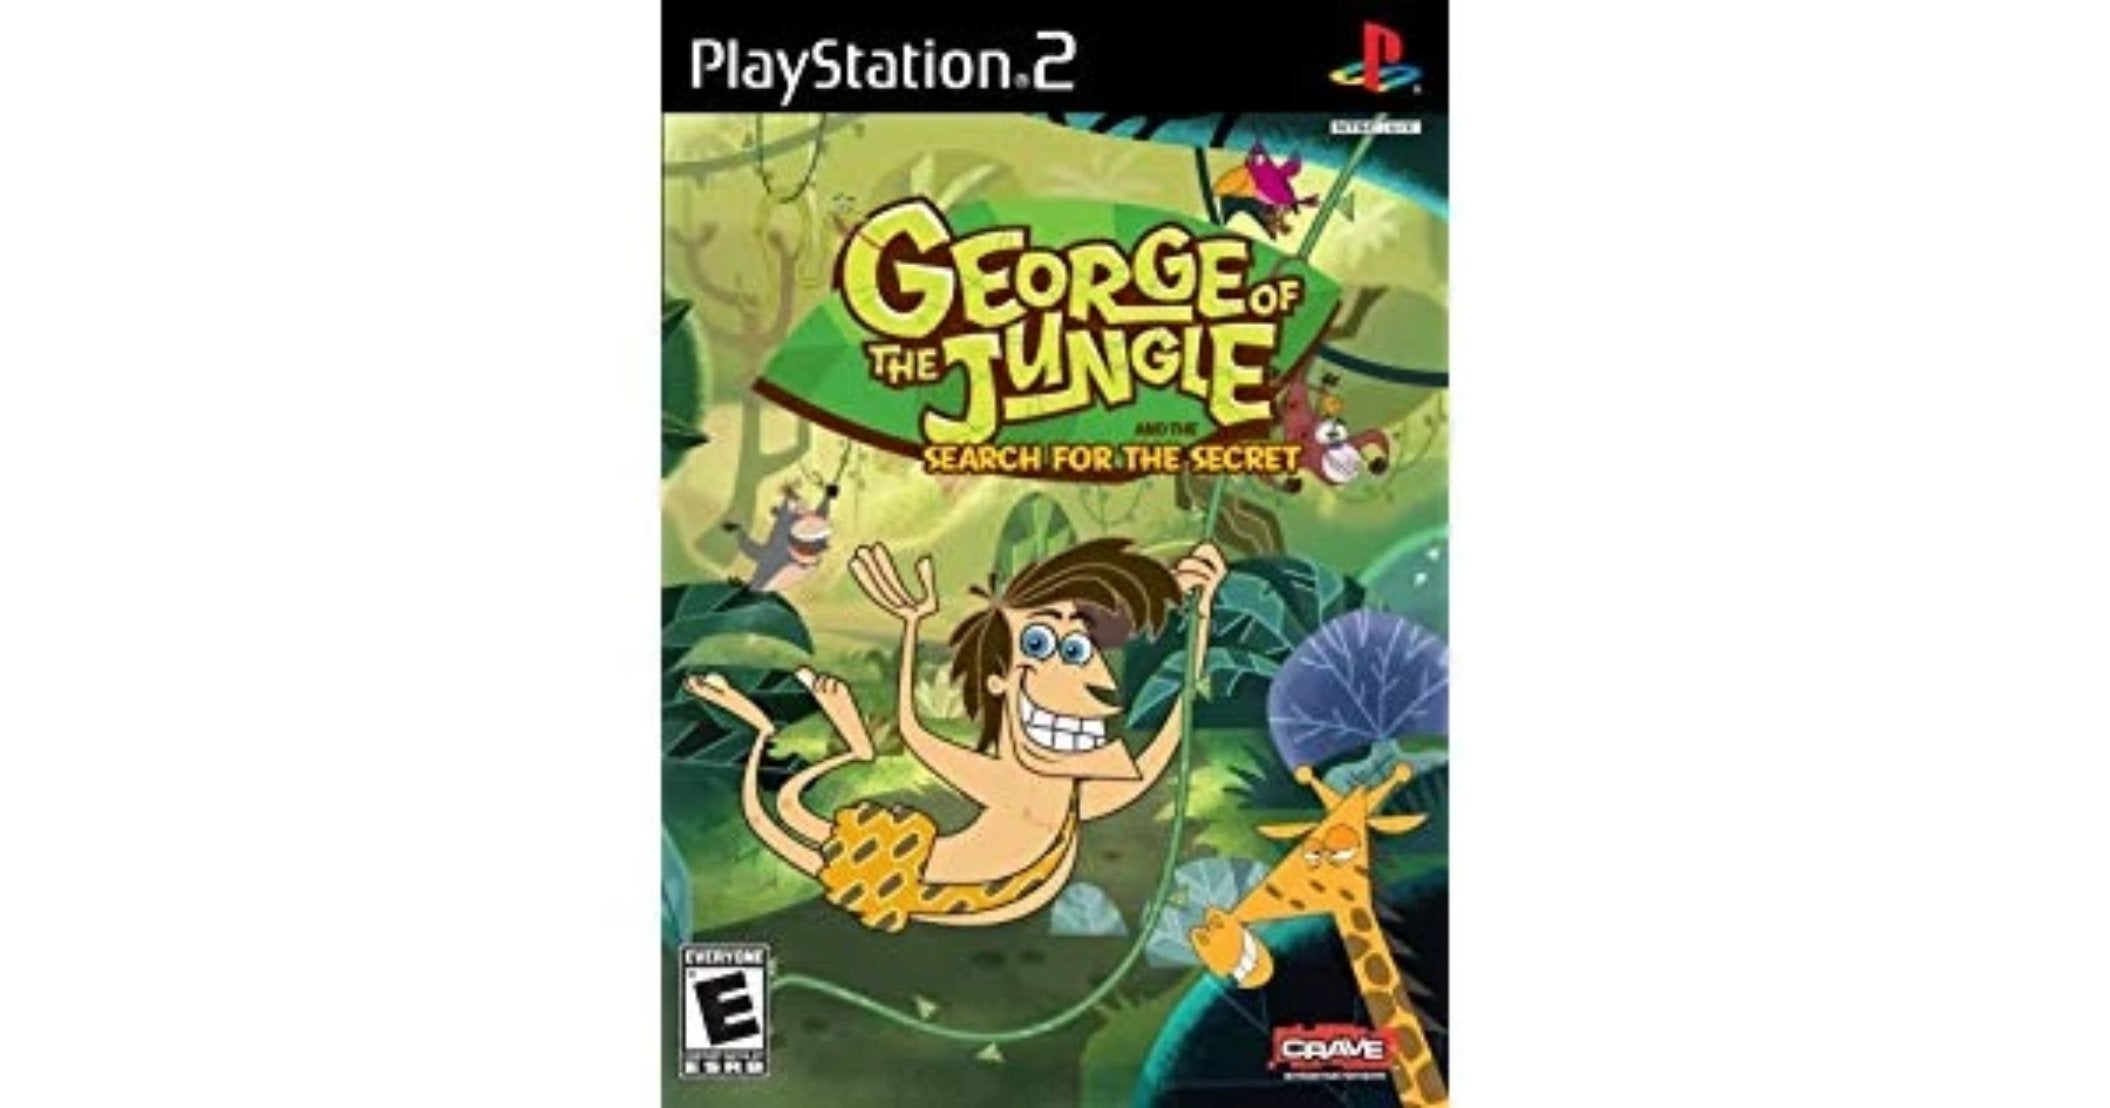 George of the Jungle and the Search for the Secret - PlayStation 2